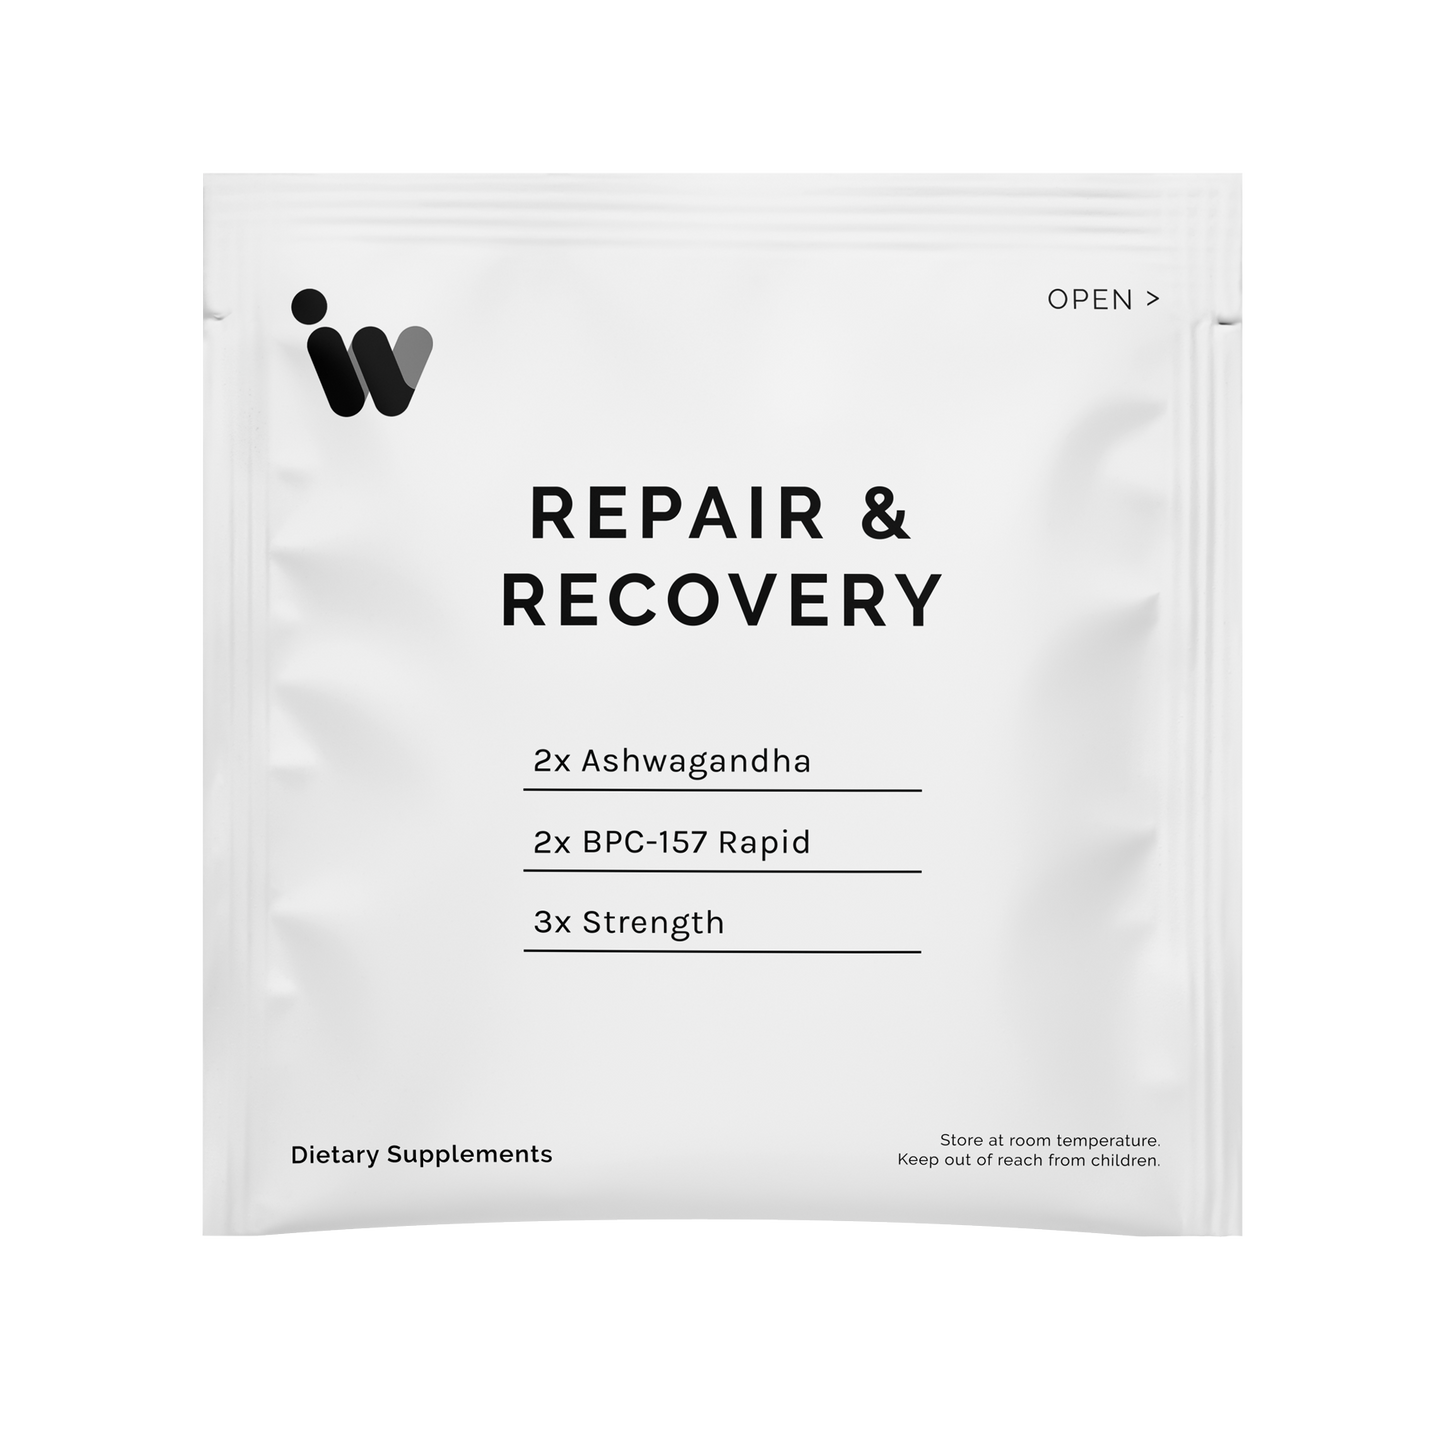 REPAIR AND RECOVERY